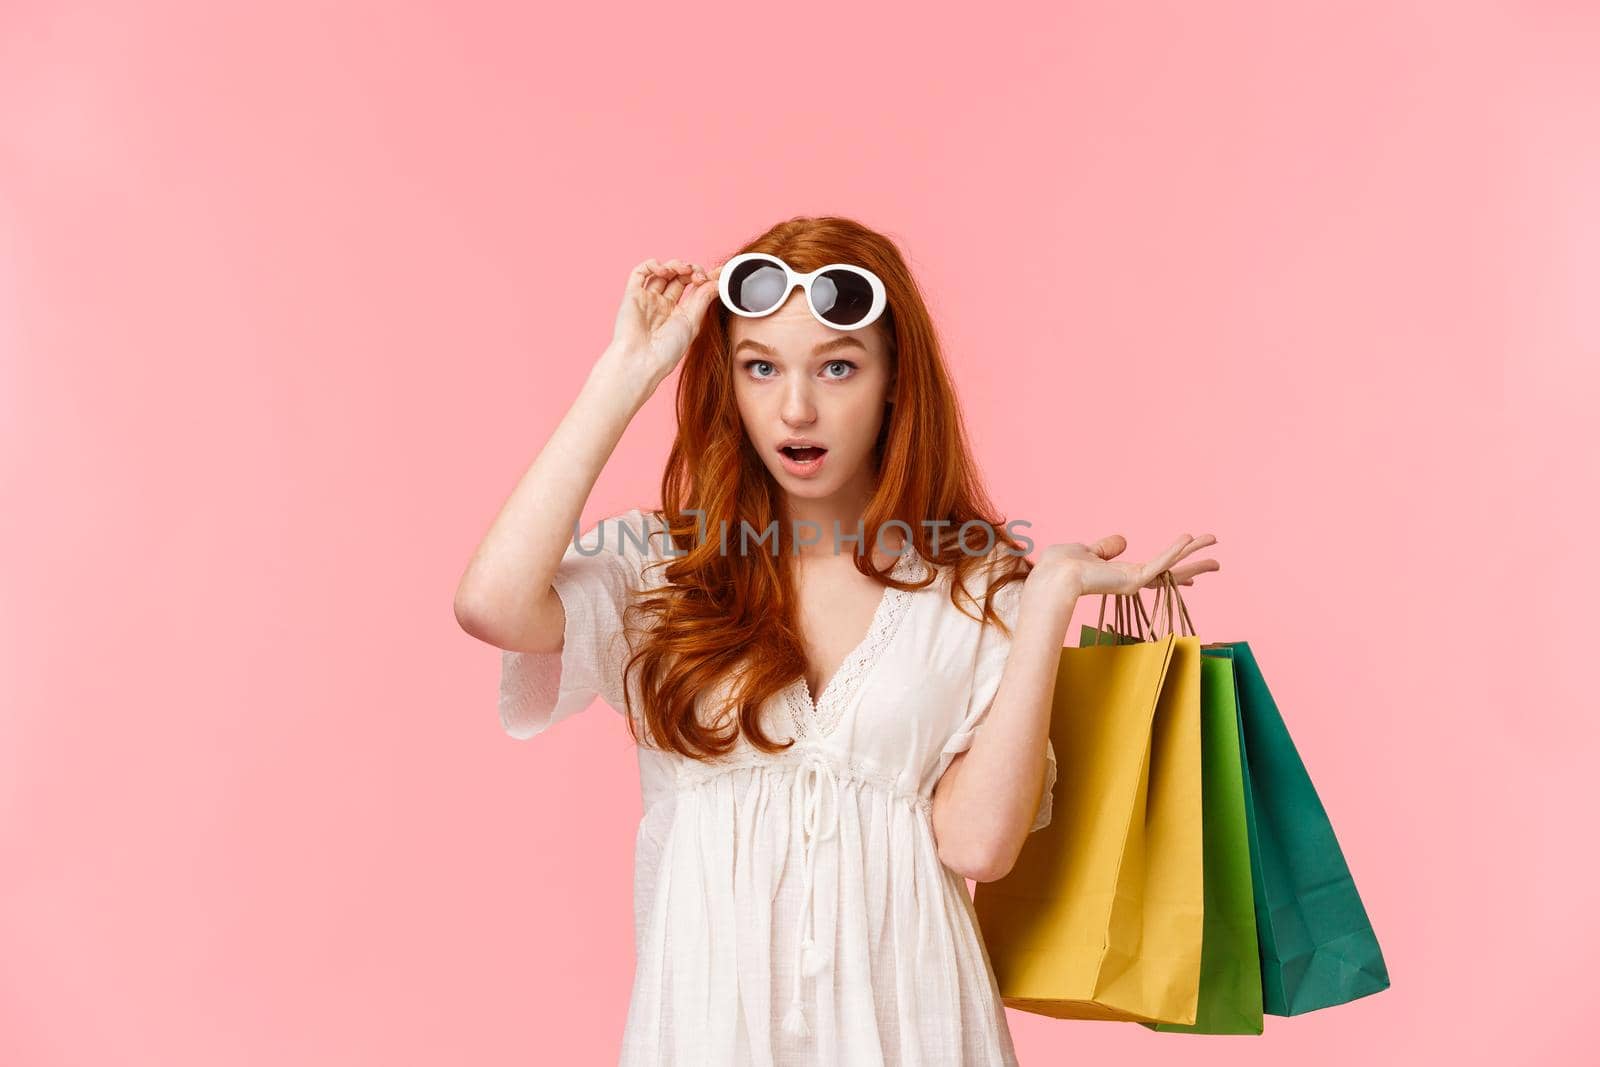 What an audacity. Shocked and speechless, astonished redhead girl take-off glasses to see something impressed, drop jaw, gasping, carry shopping bags behind back, standing pink background.